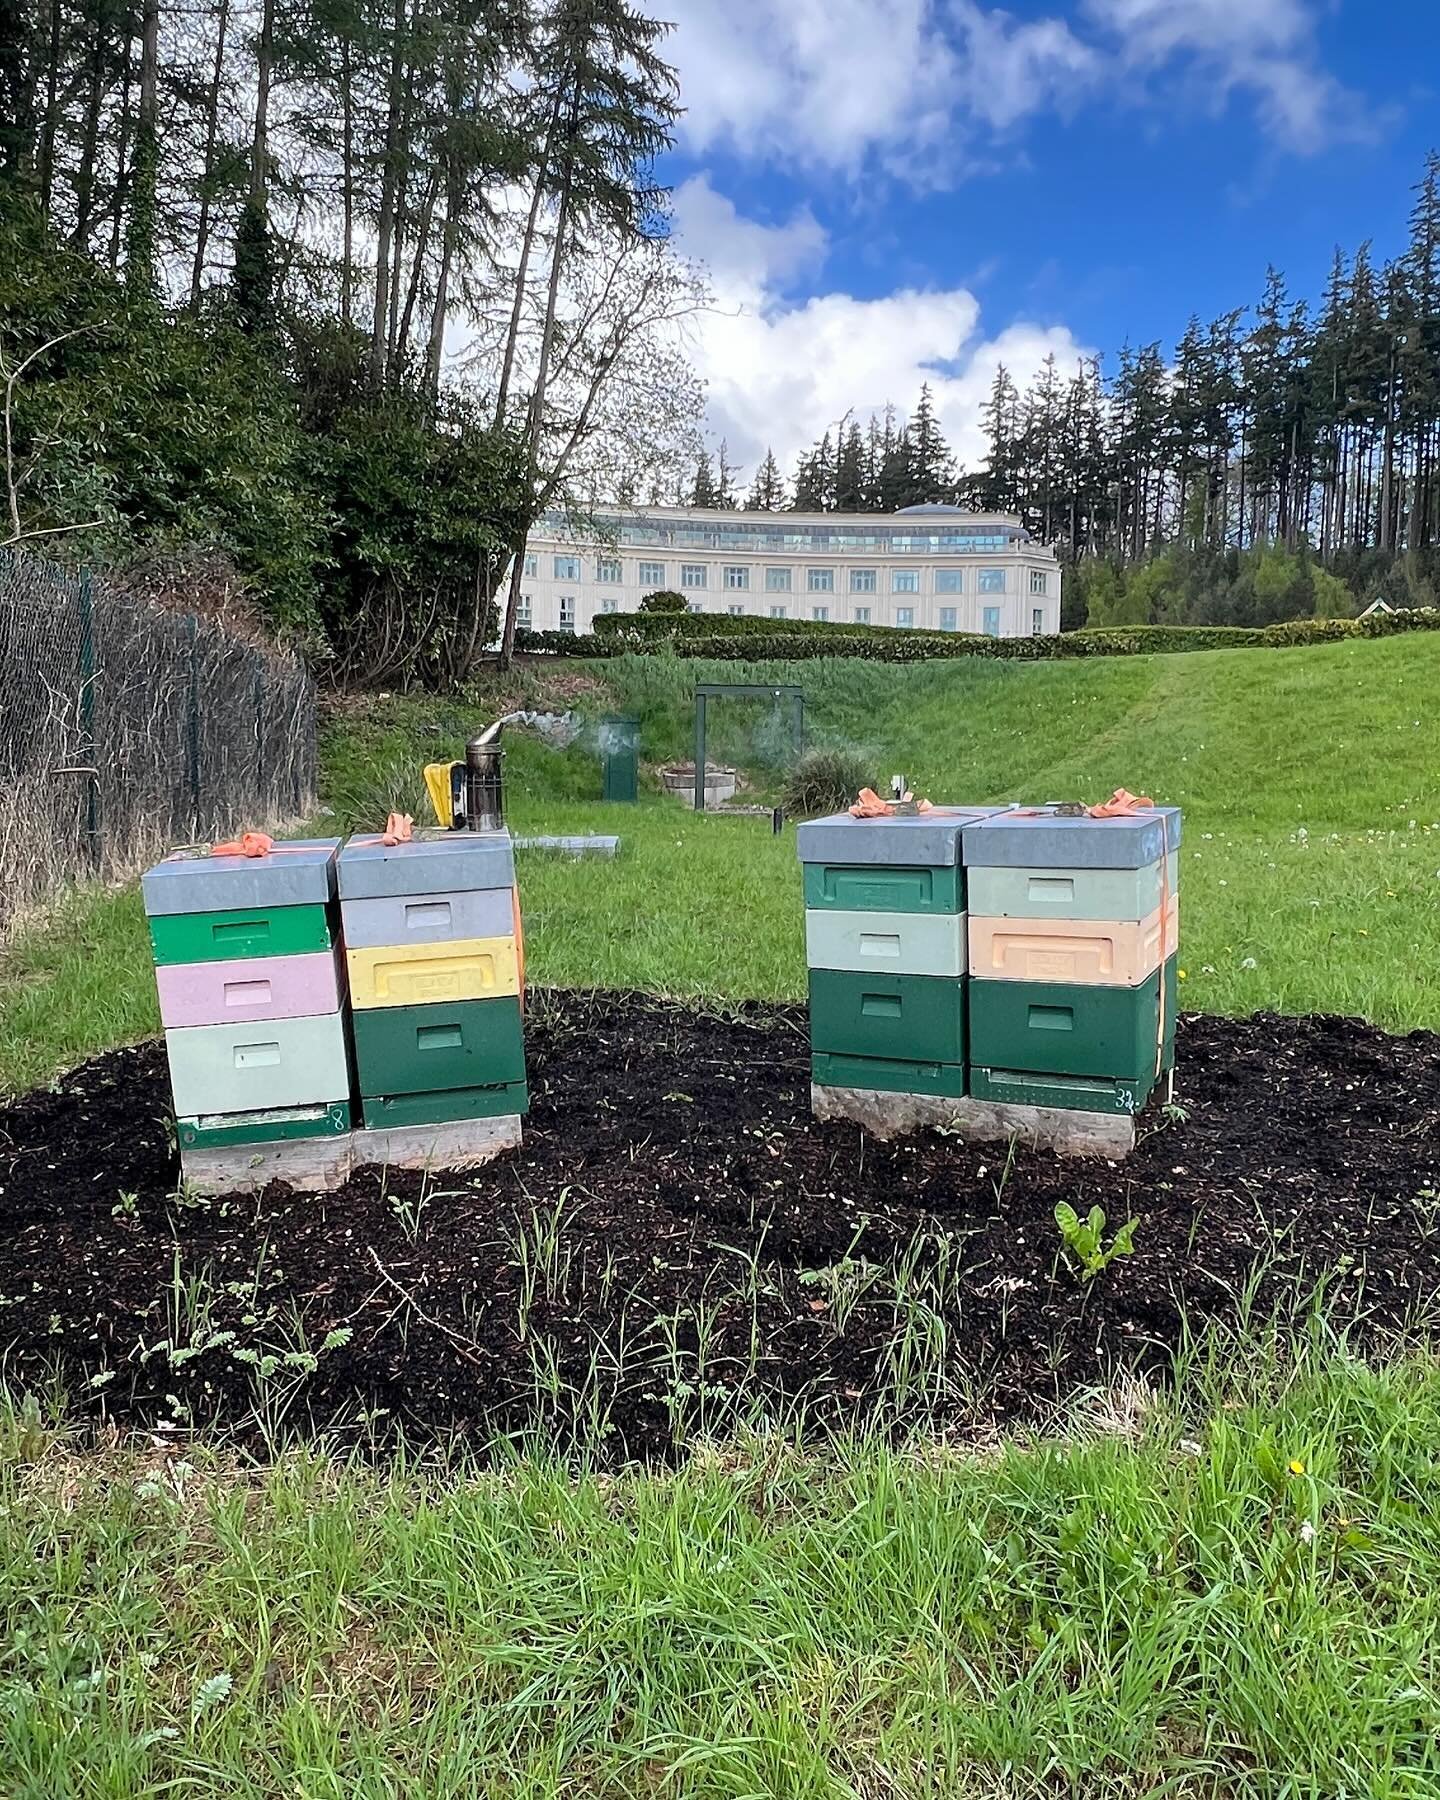 Dropped by the @powerscourthotel bees today and they&rsquo;re building up nicely. They got a 2nd super each. 

I&rsquo;ve no idea when they&rsquo;re getting out to forage but 2 of them had nearly a full box of honey already. 

#wicklow #irishhoney #o